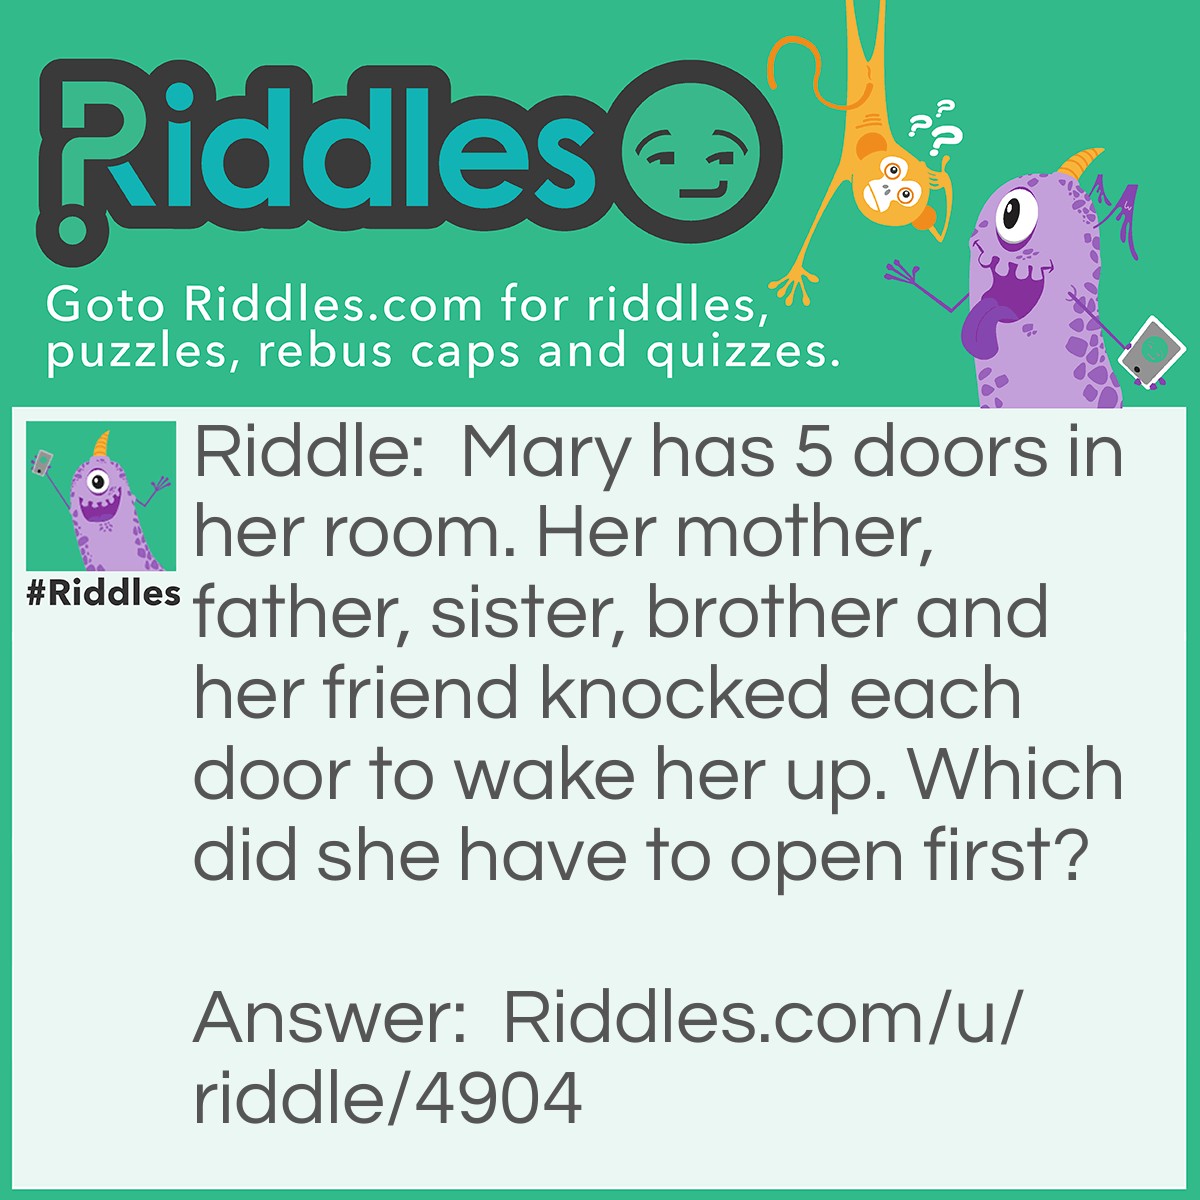 Riddle: Mary has 5 doors in her room. Her mother, father, sister, brother and her friend knocked each door to wake her up. Which did she have to open first? Answer: Her eyes.